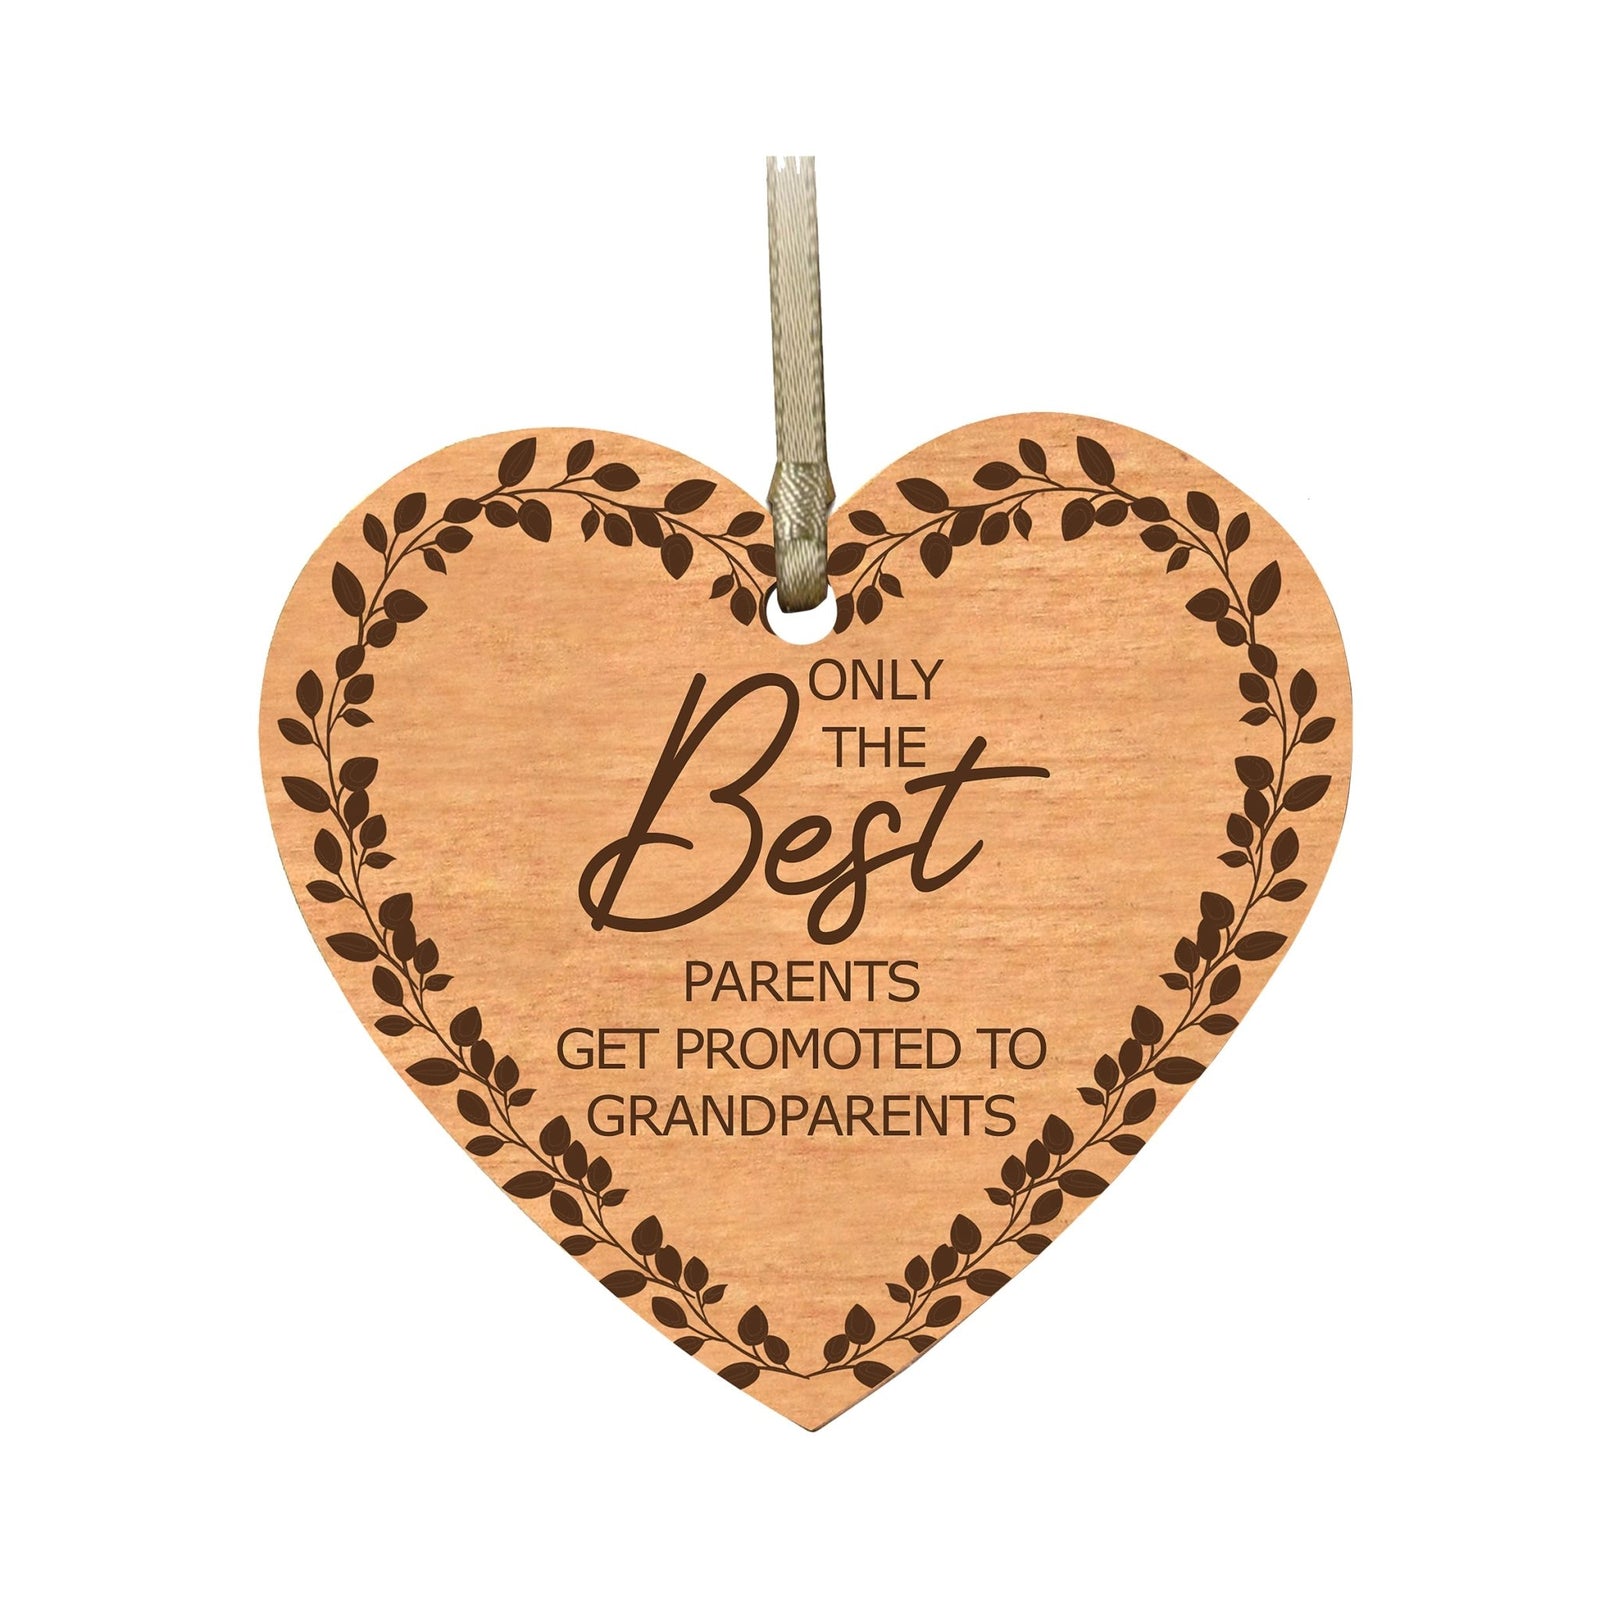 Modern 3.75in Christmas Wooden Heart Ornament for Grandparents - Only The Best Parents